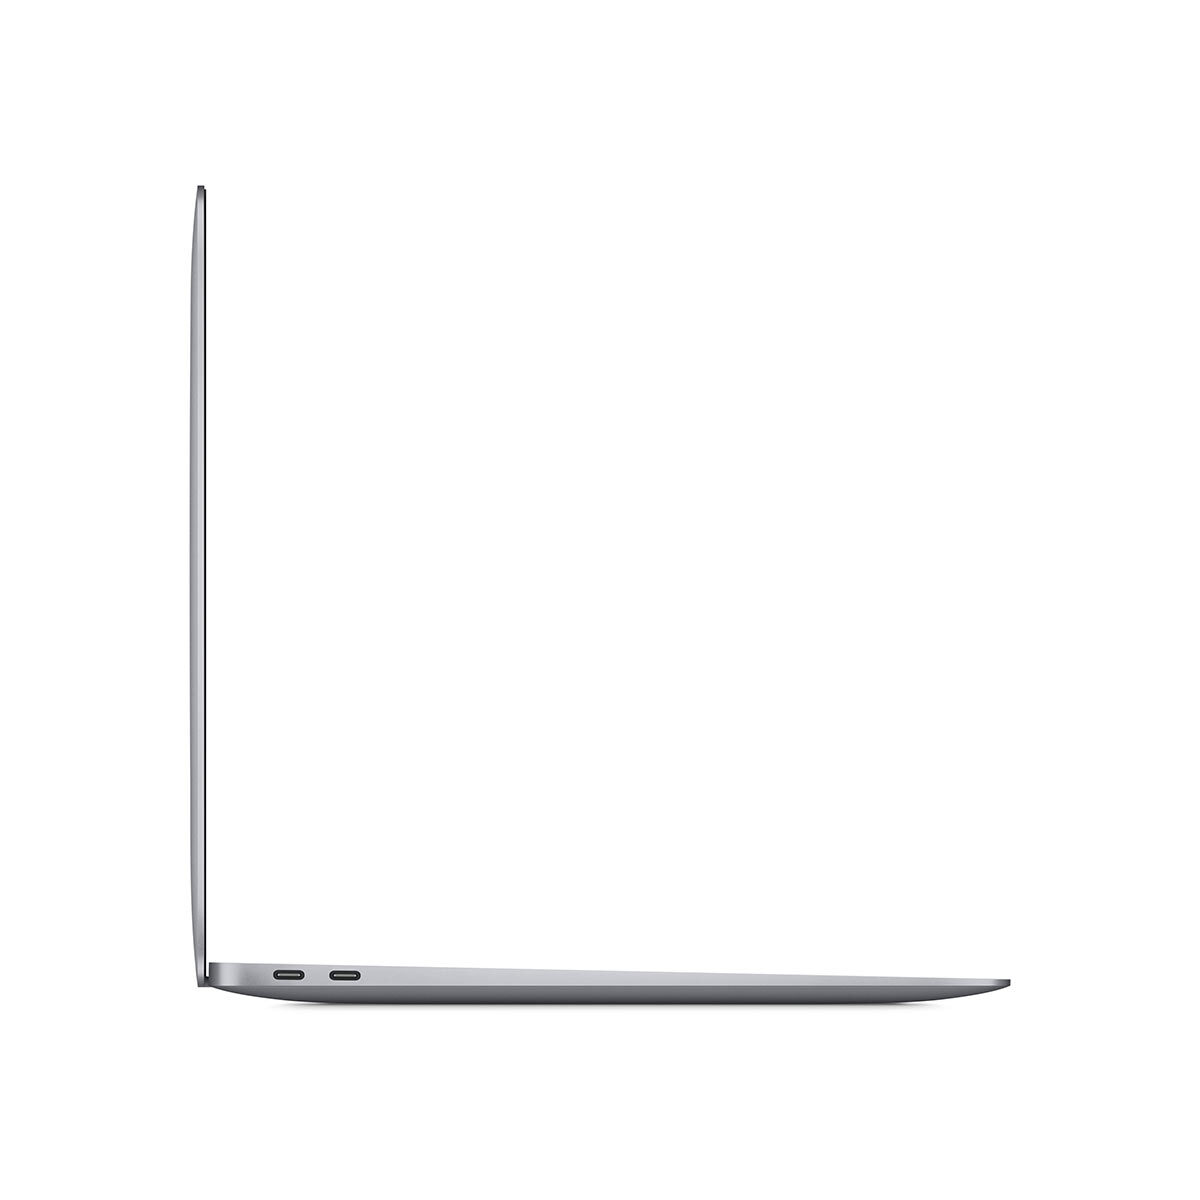 Buy Apple MacBook Air 2020, Apple M1 Chip, 8GB RAM, 512GB SSD, 13.3 Inch in Space Grey, MGN73B/A at costco.co.uk